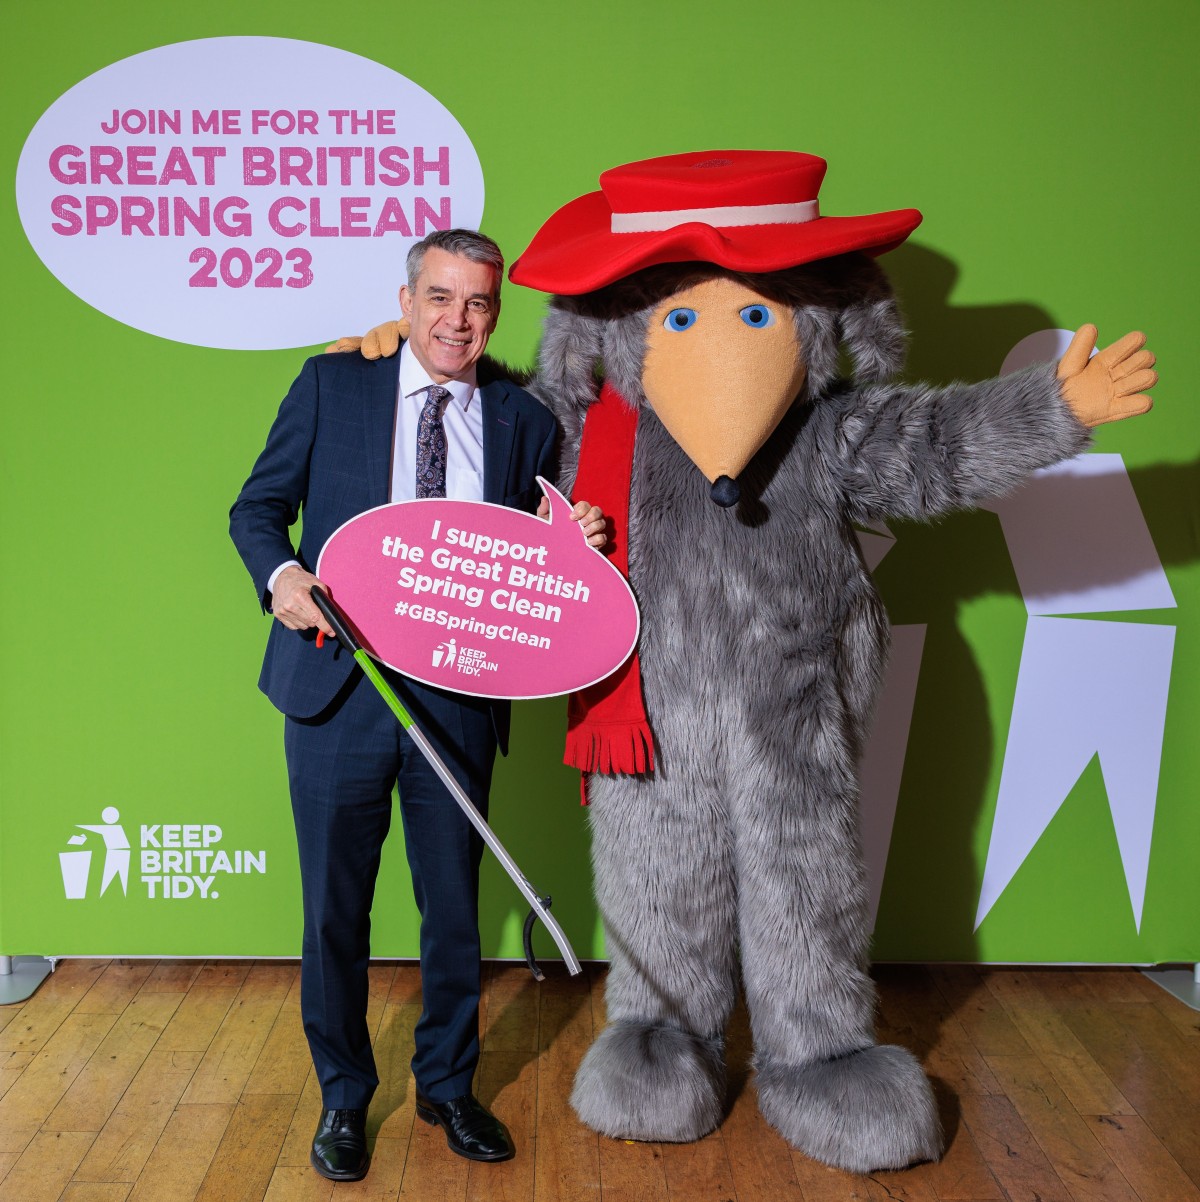 Showing pride in our places: Jeff Smith MP supports constituents pledging to pick litter for charity’s Great British Spring Clean campaign 